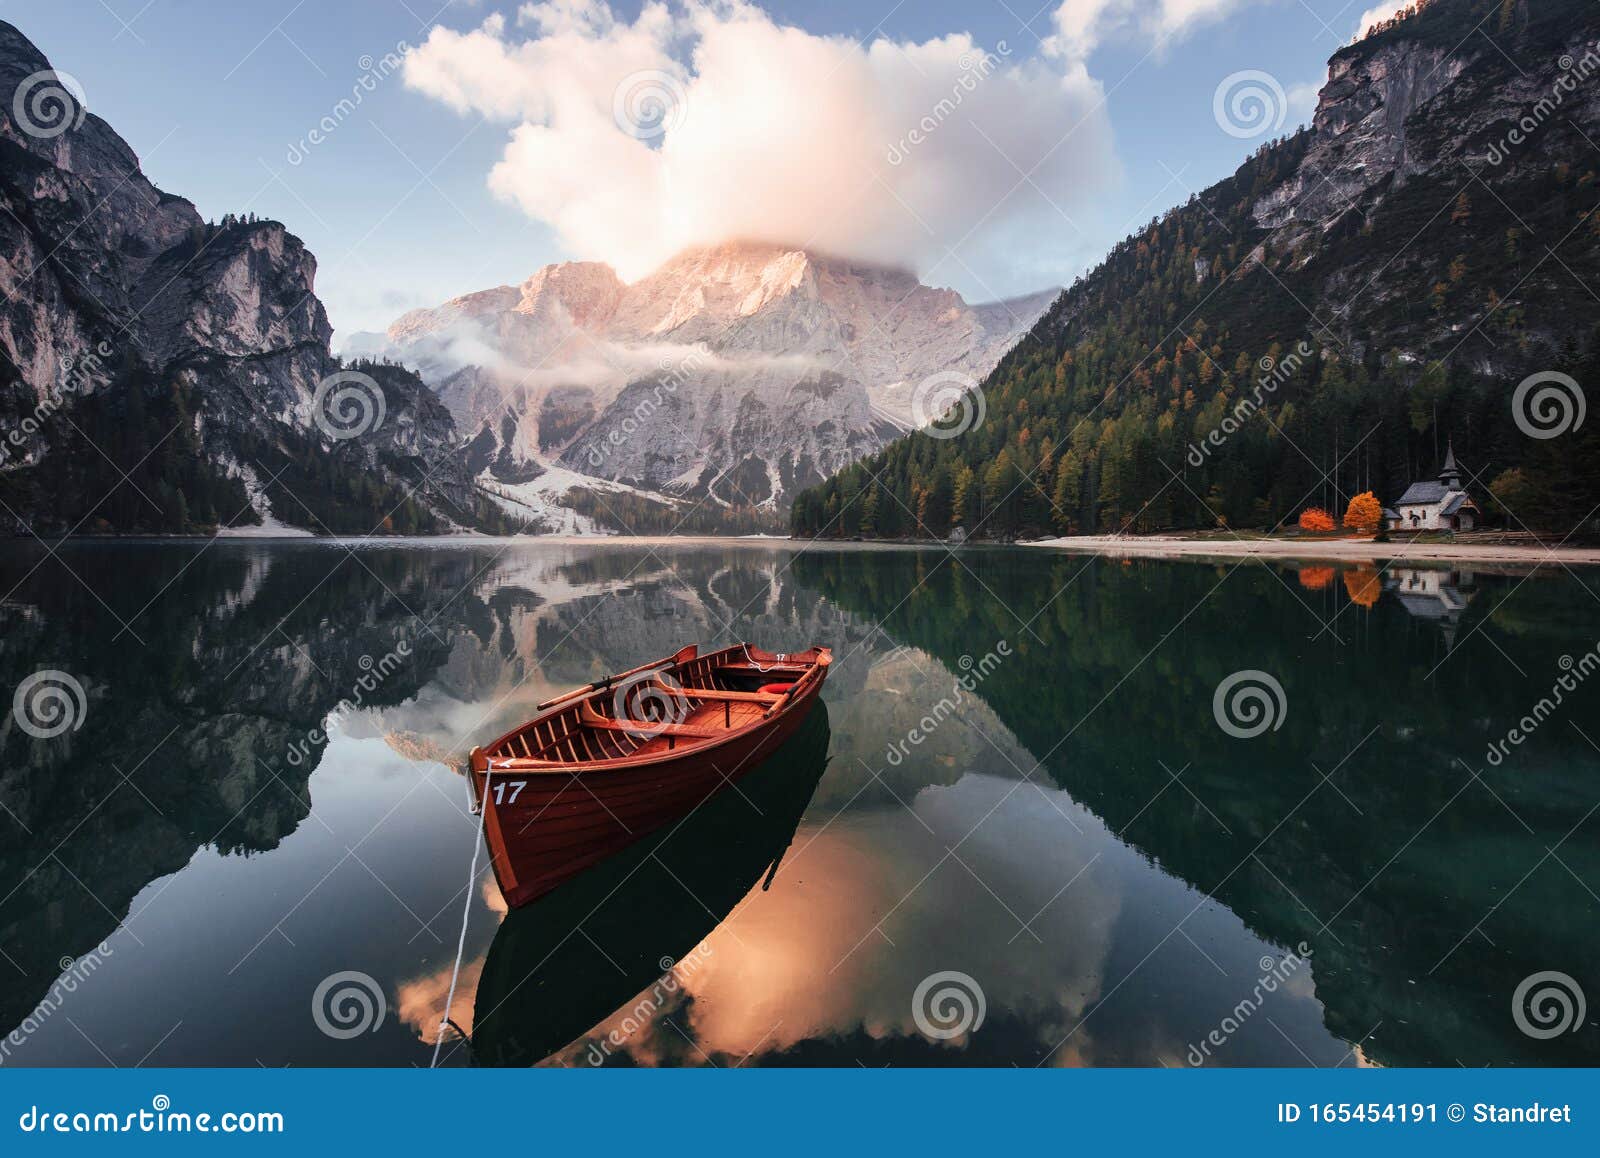 gorgeous landscape. wooden boat on the crystal lake with majestic mountain behind. reflection in the water. chapel is on